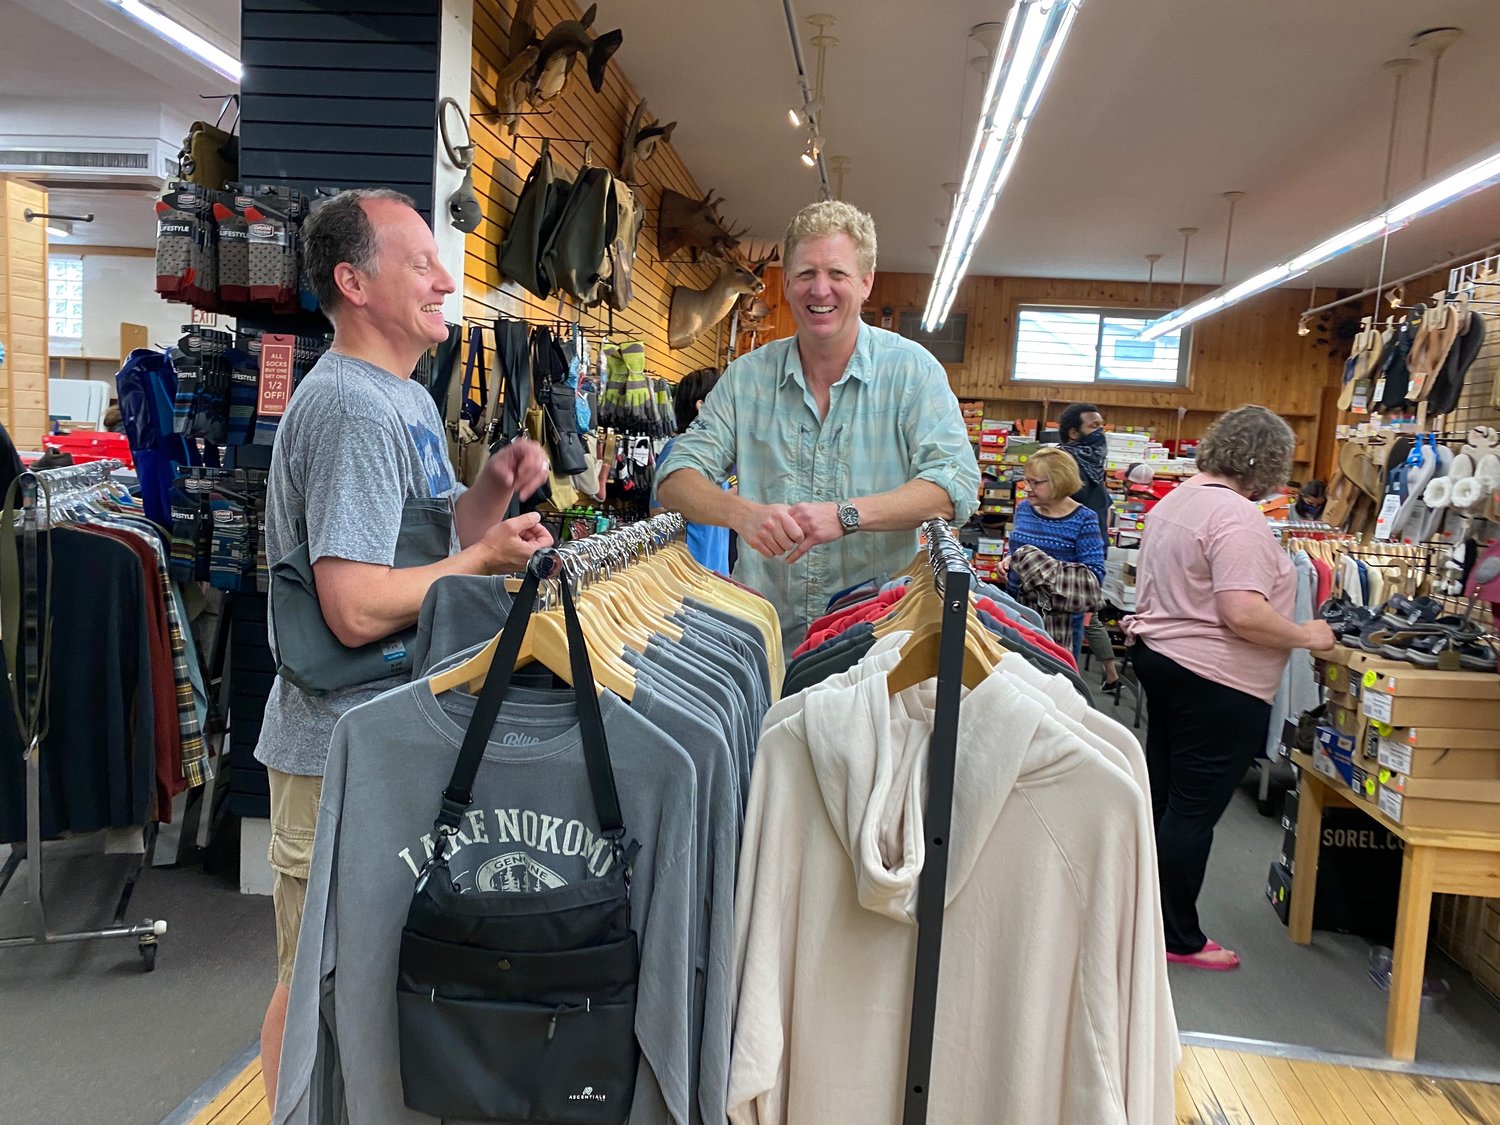 Nokomis Shoe Shop owner Steve Negaard (right) with Tre McClellan welcome folks into the store for the sidewalk sale, which moved instead after it rained on Saturday, Aug. 7. Negaard was delighted to see other business engaging in Crazy Days again. "As a guy who has been doing it for 45 years, it's so fun to see the neighborhood coming back alive," he said. Nokomis Shoes used to be located next to the bowling alley (formerly Skylanes, now Town Hall) and items filled the sidewalk in front of the bowling alley. "I remember being a kid in high school and dreading working the long days in the heat," said Negaard.